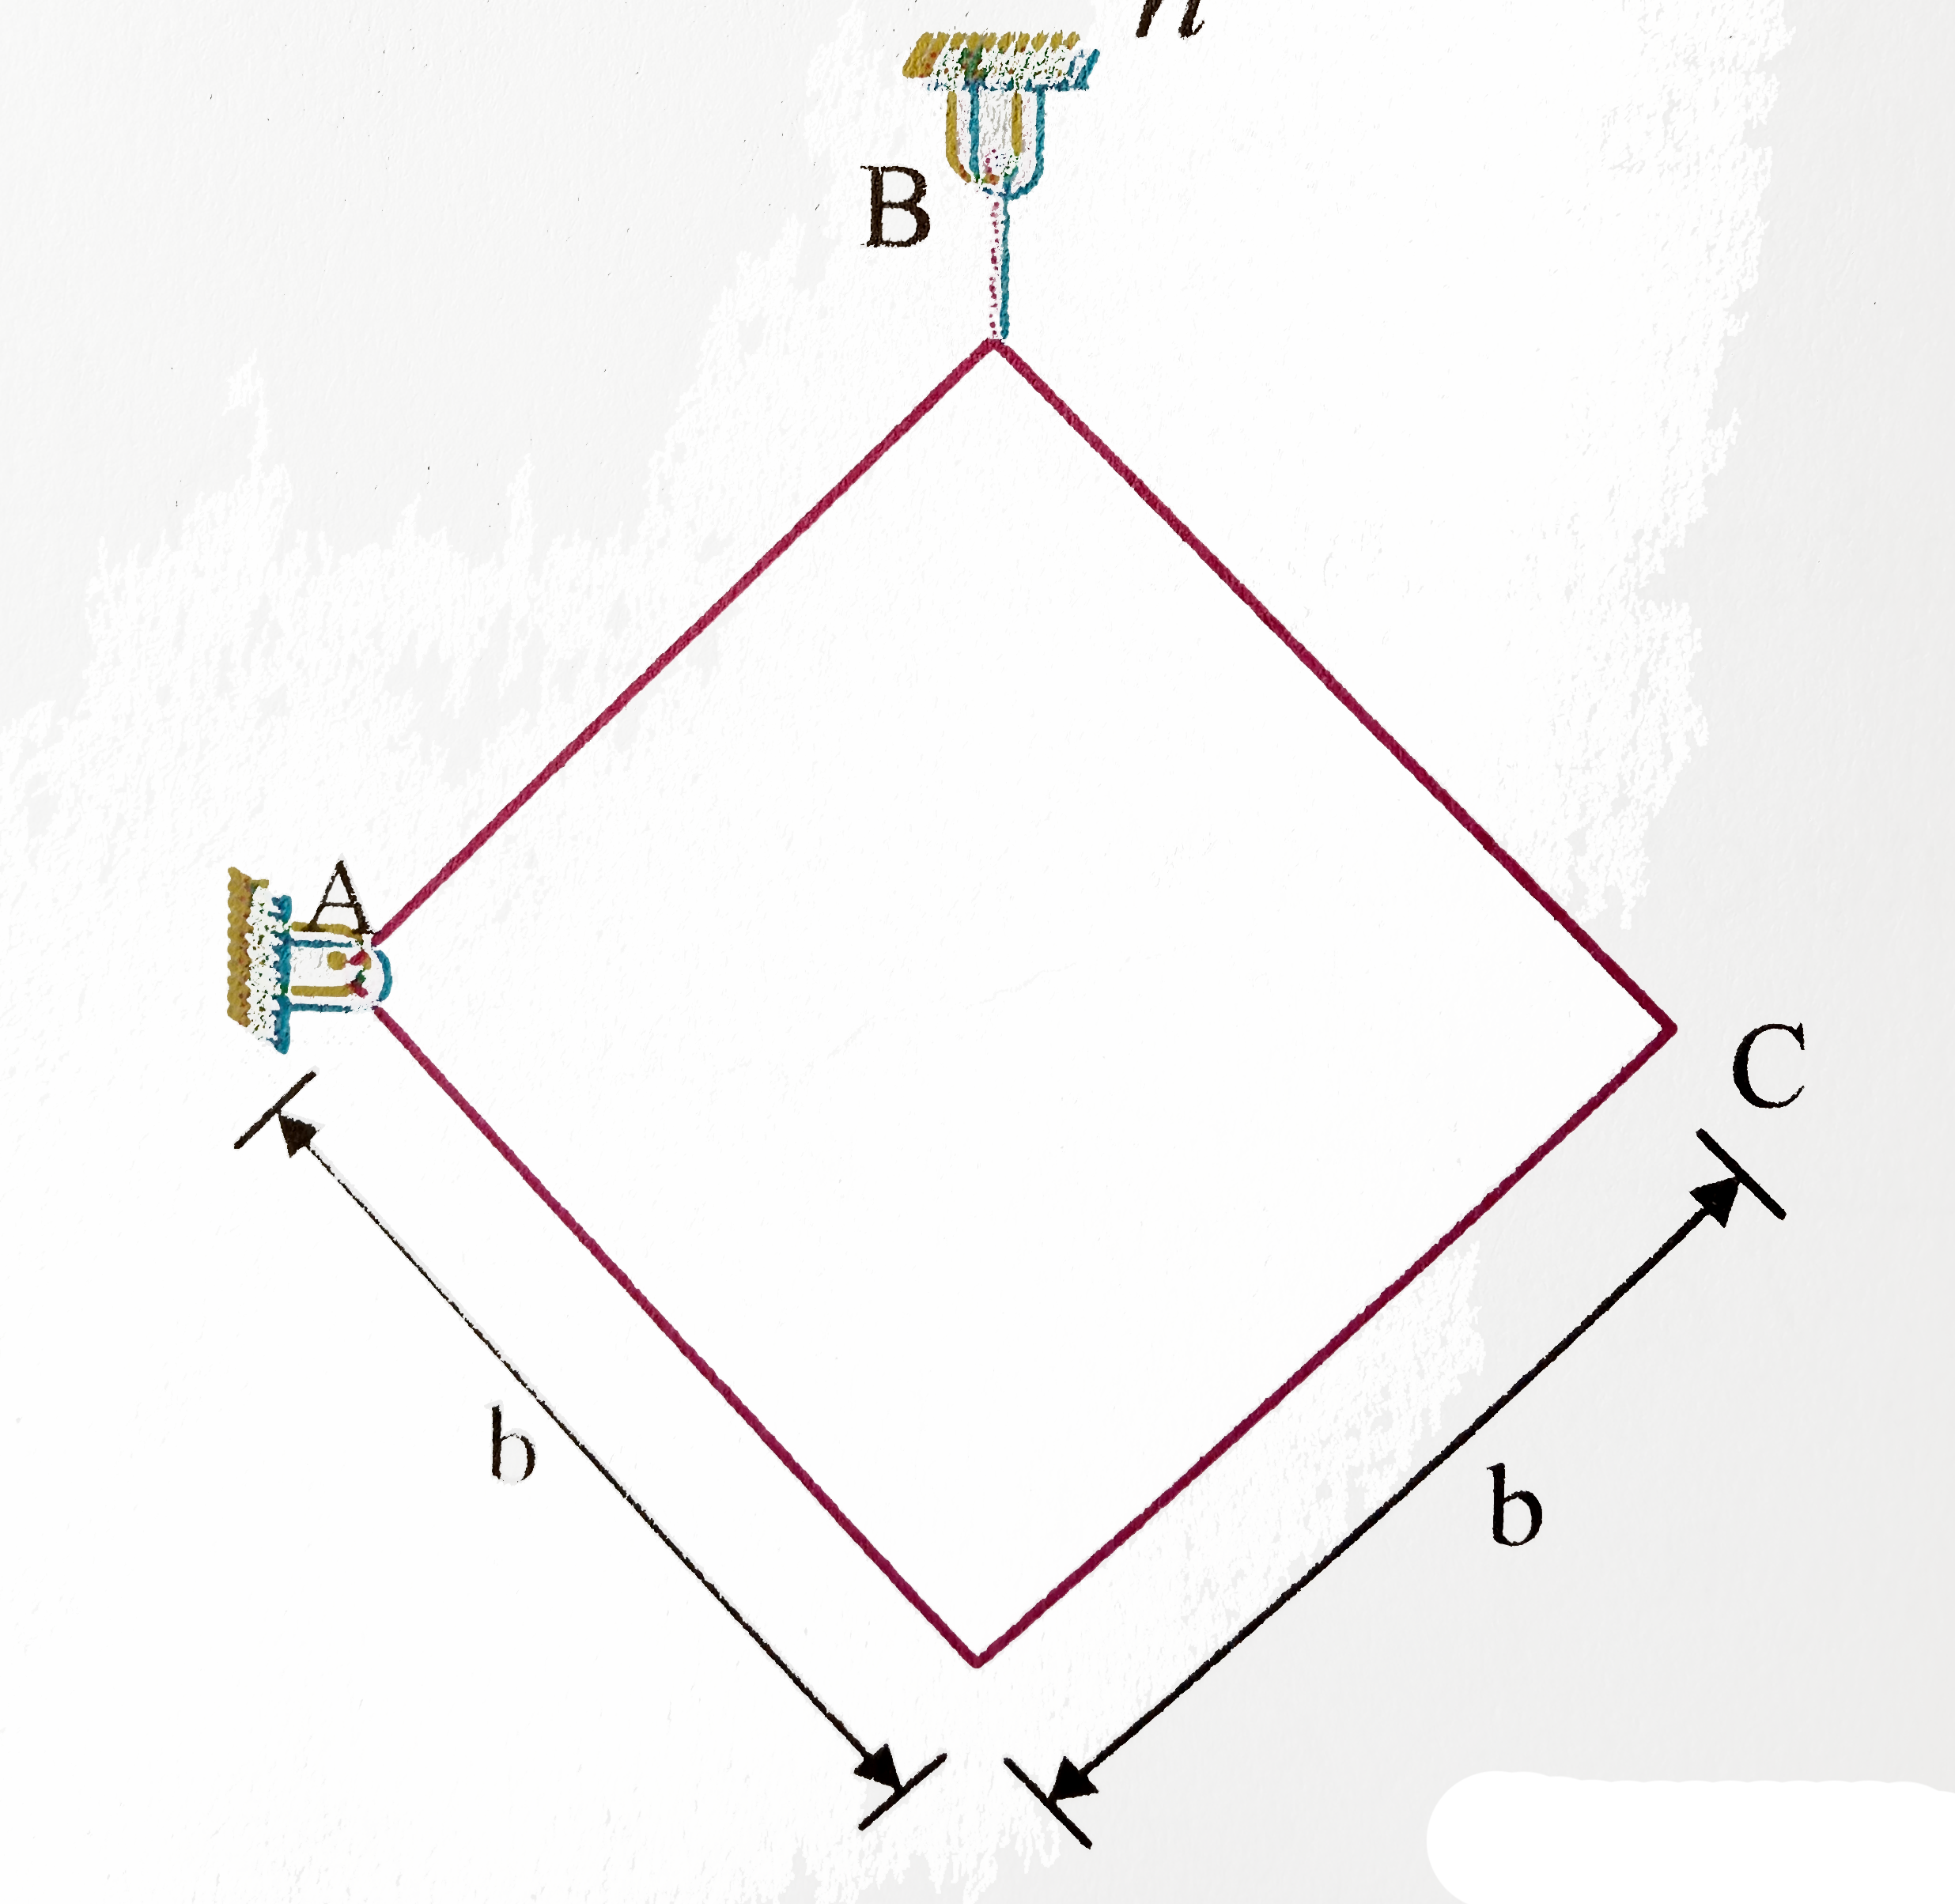 A uniform square plate of mass 'm'is supported as shown. If the cable suddenly breaks, assuming centre of mass is on horizontal line passing through A determine, the reaction at A is (mg)/n that n is